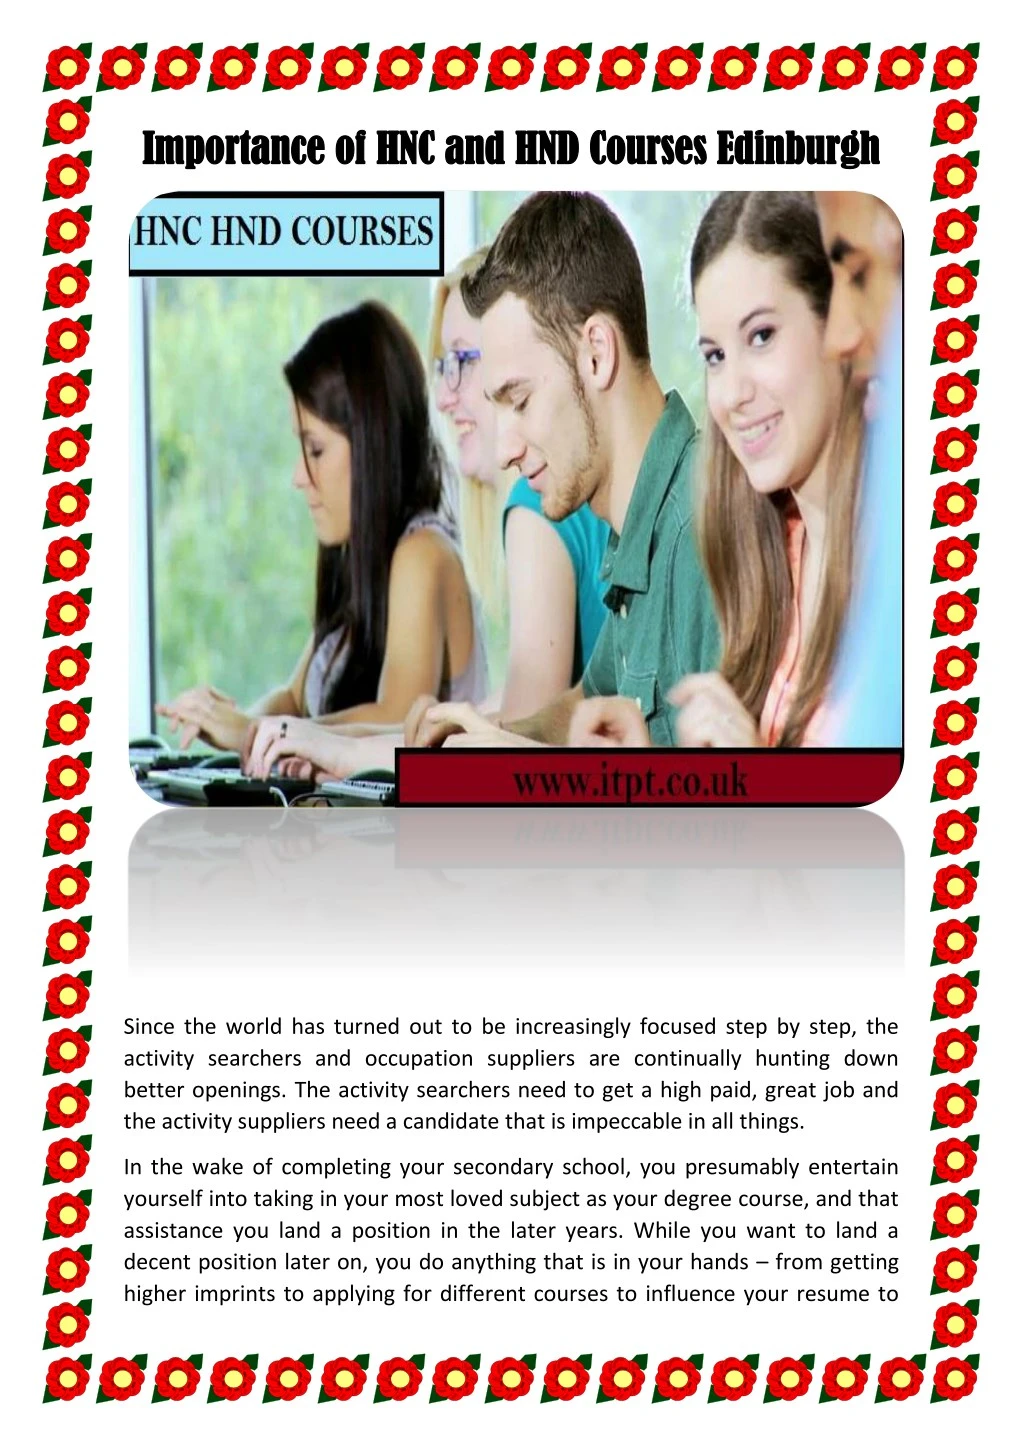 importance of importance of hnc and hnd courses